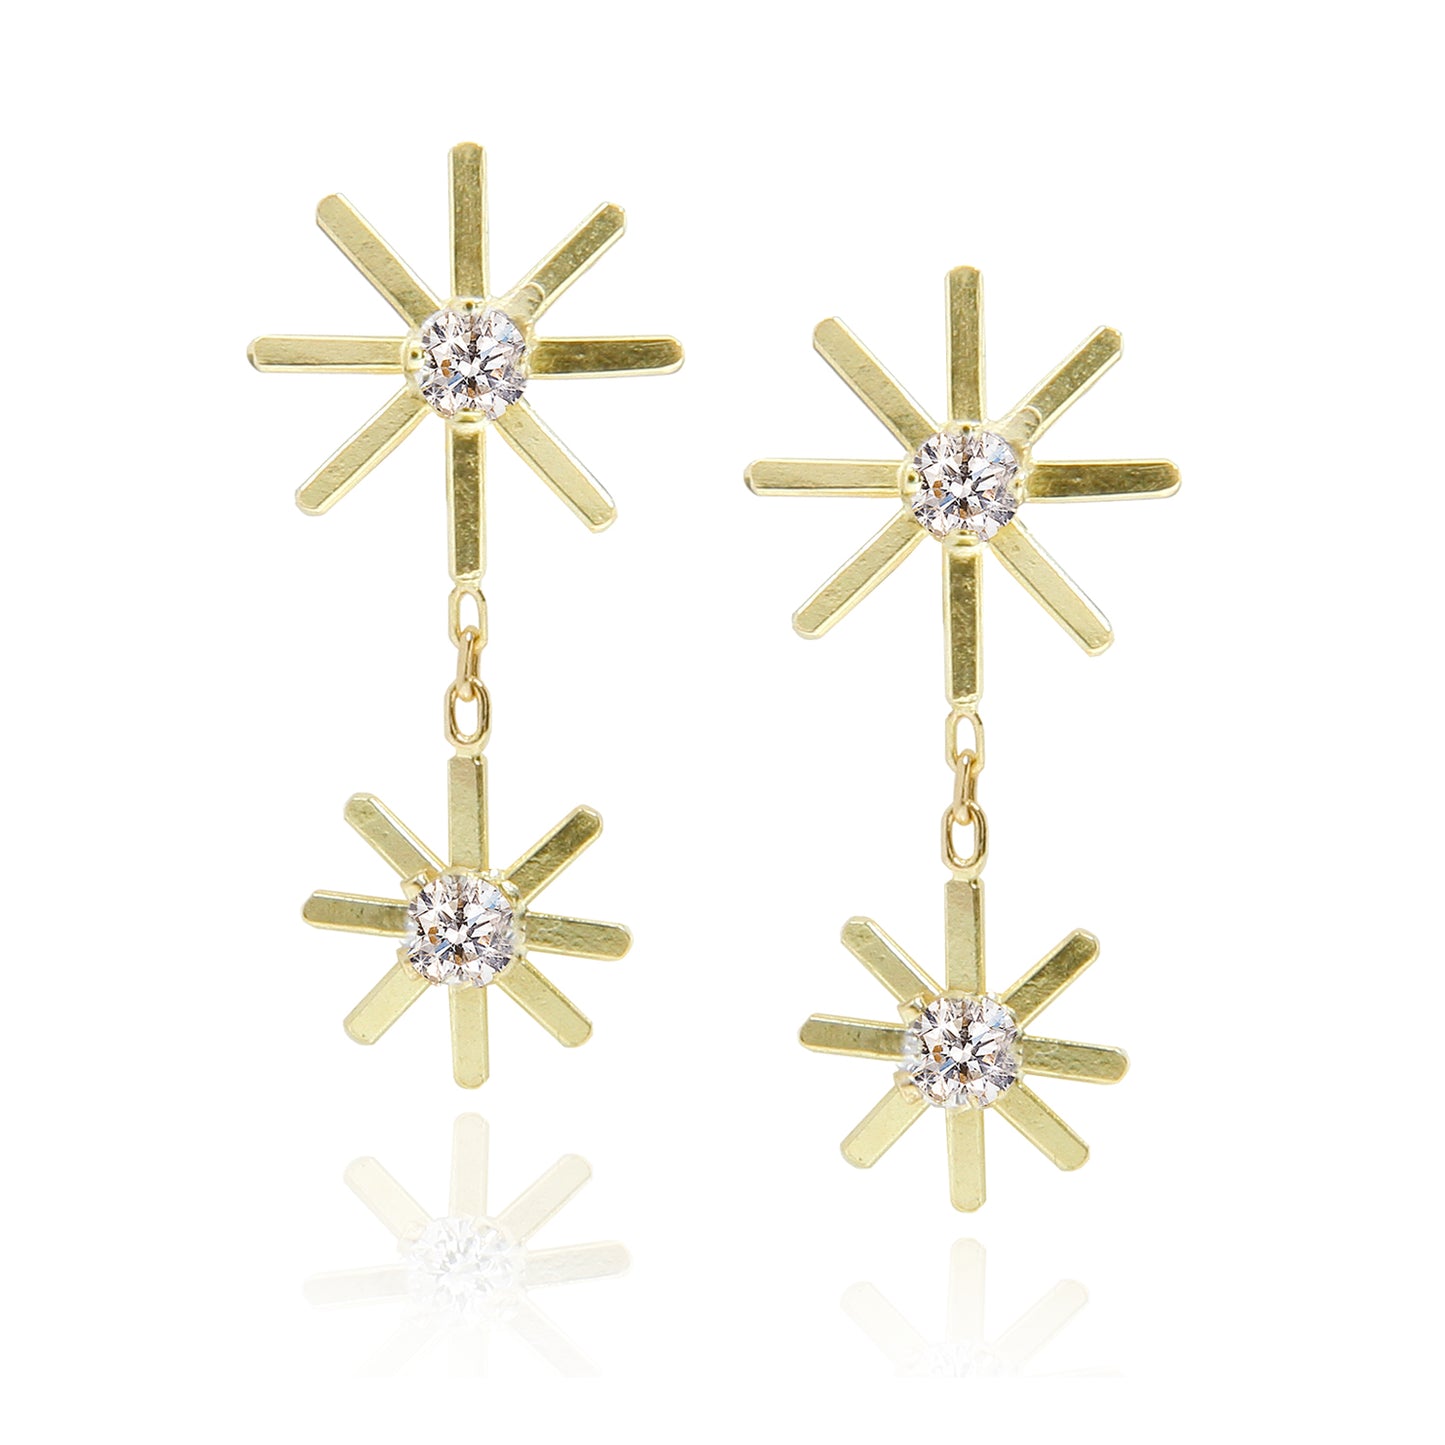 These 18ct yellow gold fine double Diamond stud earrings are from our Pop Up Daisy Collection. The Flower motif is made up from fine gold petals and features a central Diamond set collet.